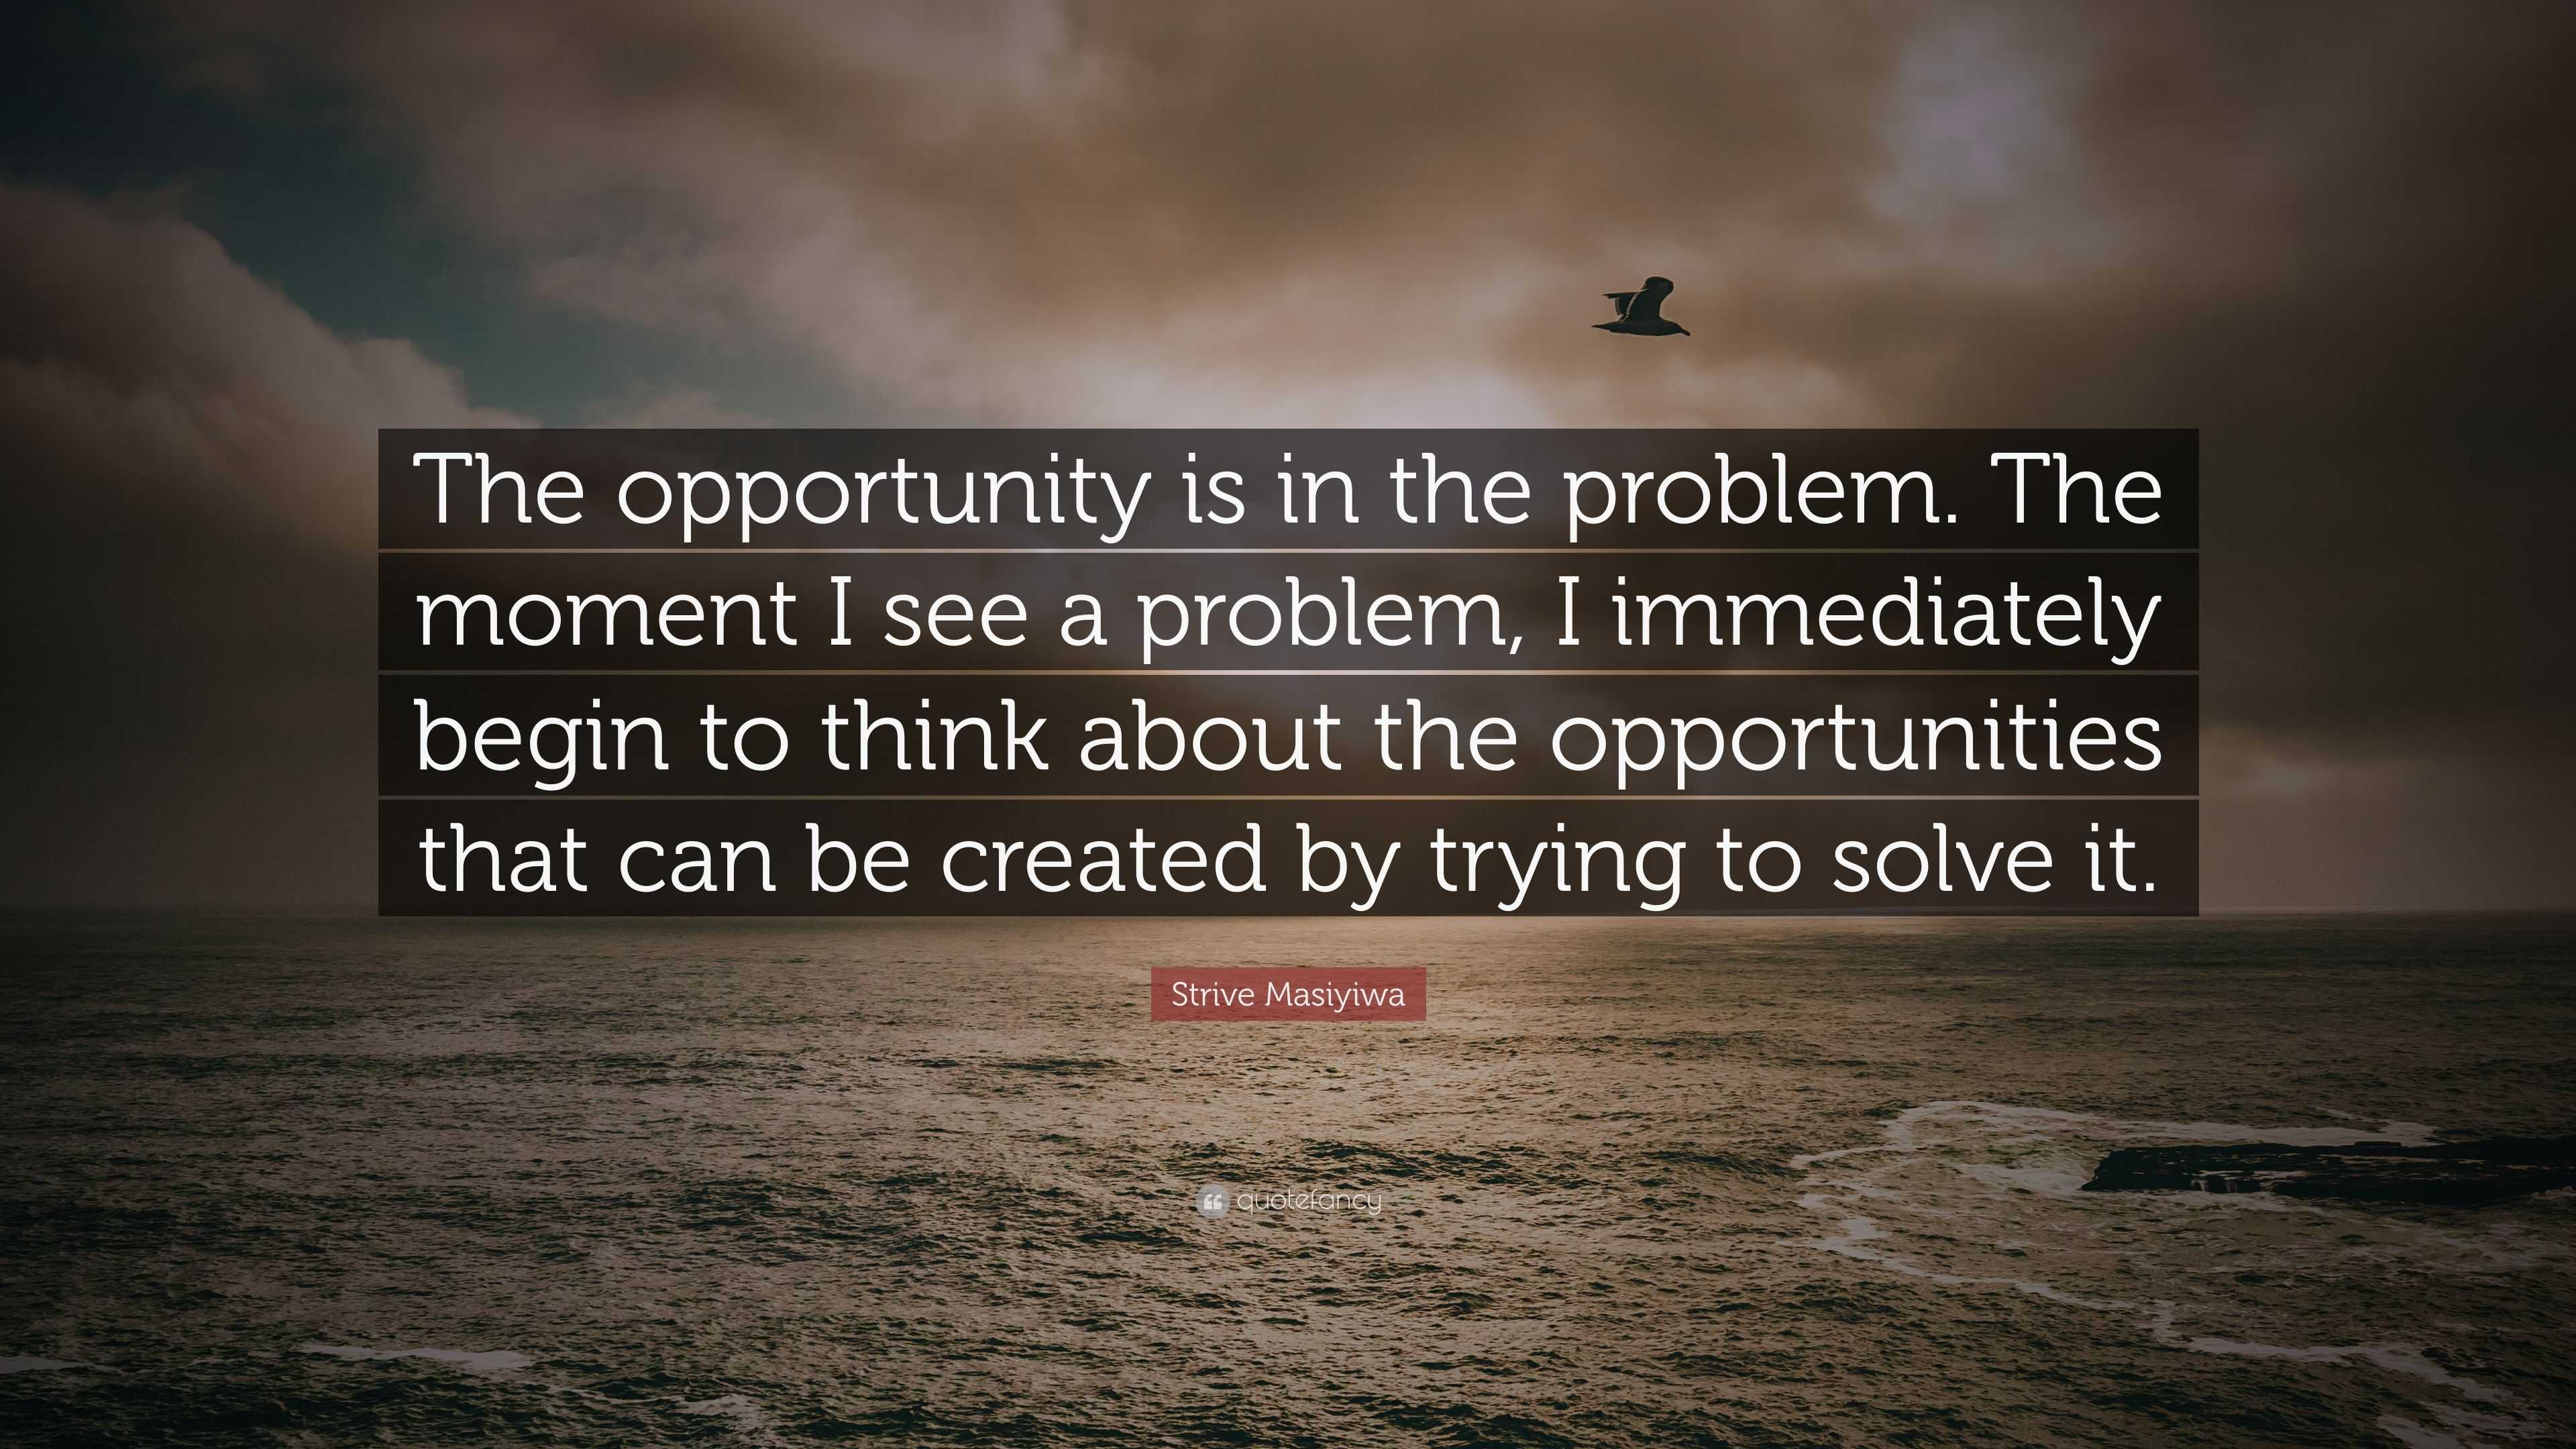 Strive Masiyiwa Quote: “The opportunity is in the problem. The moment I see  a problem, I immediately begin to think about the opportunities that”